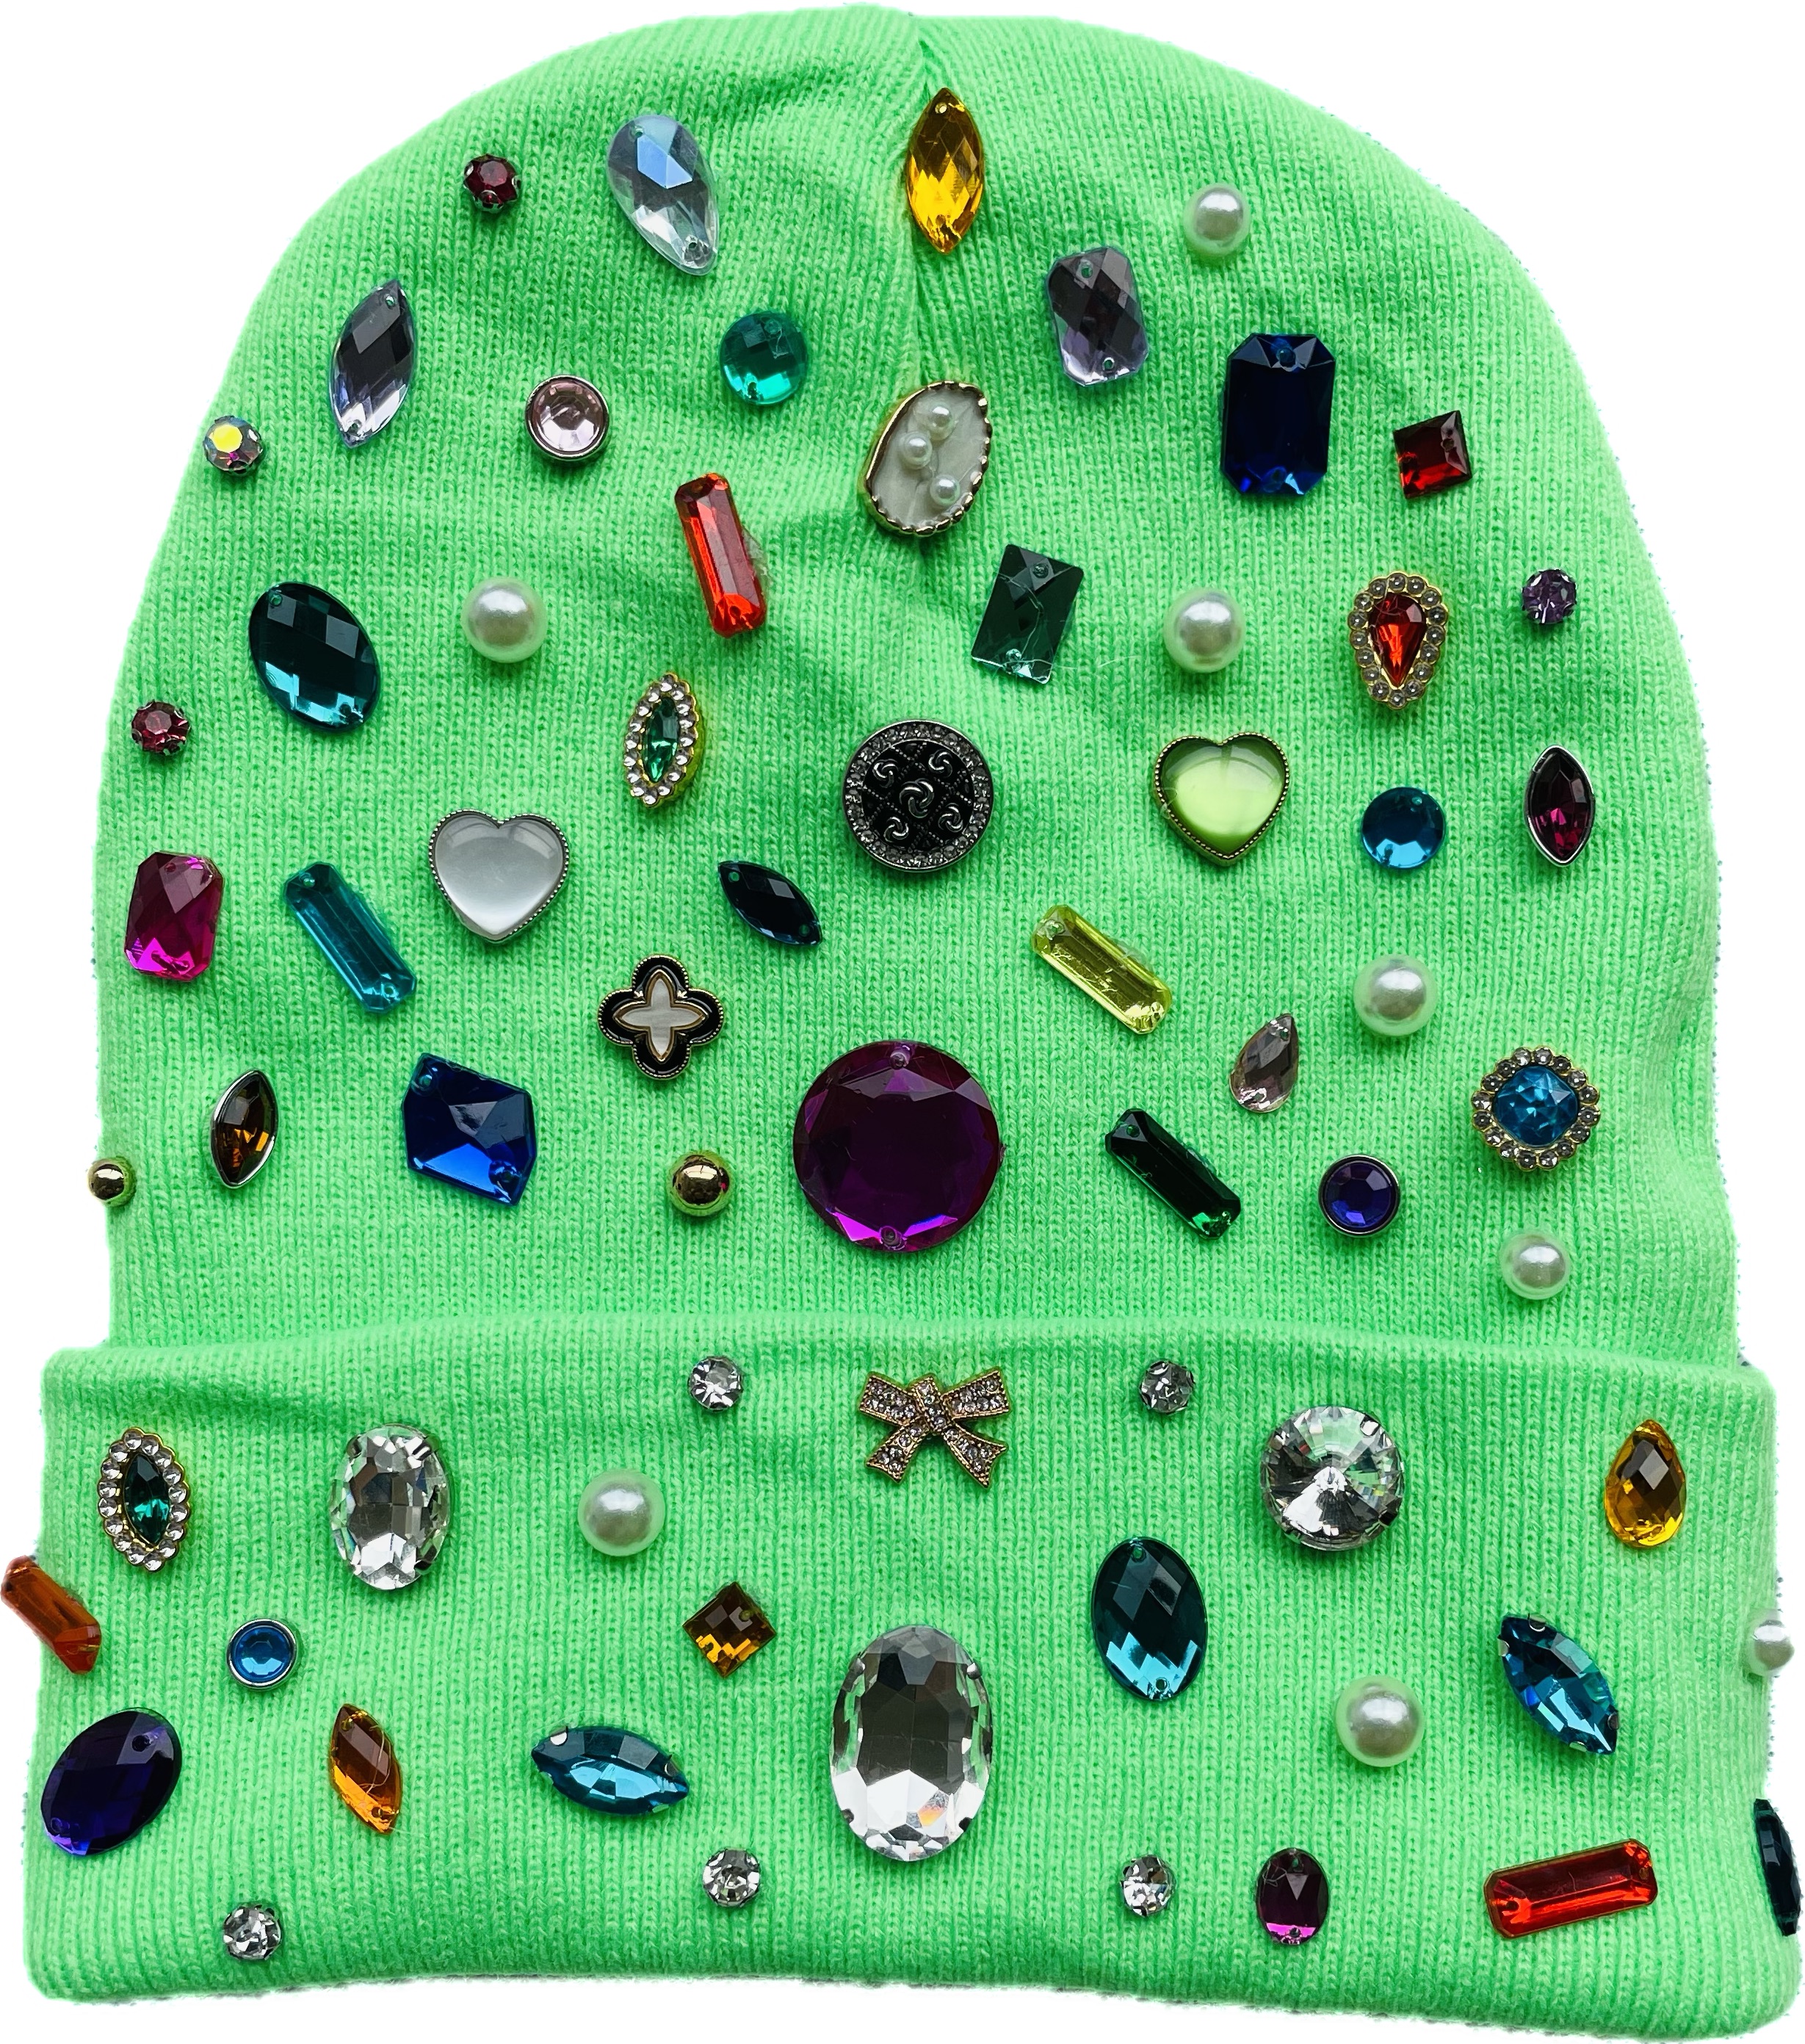 Fluorescent Green Bejeweled Beanie